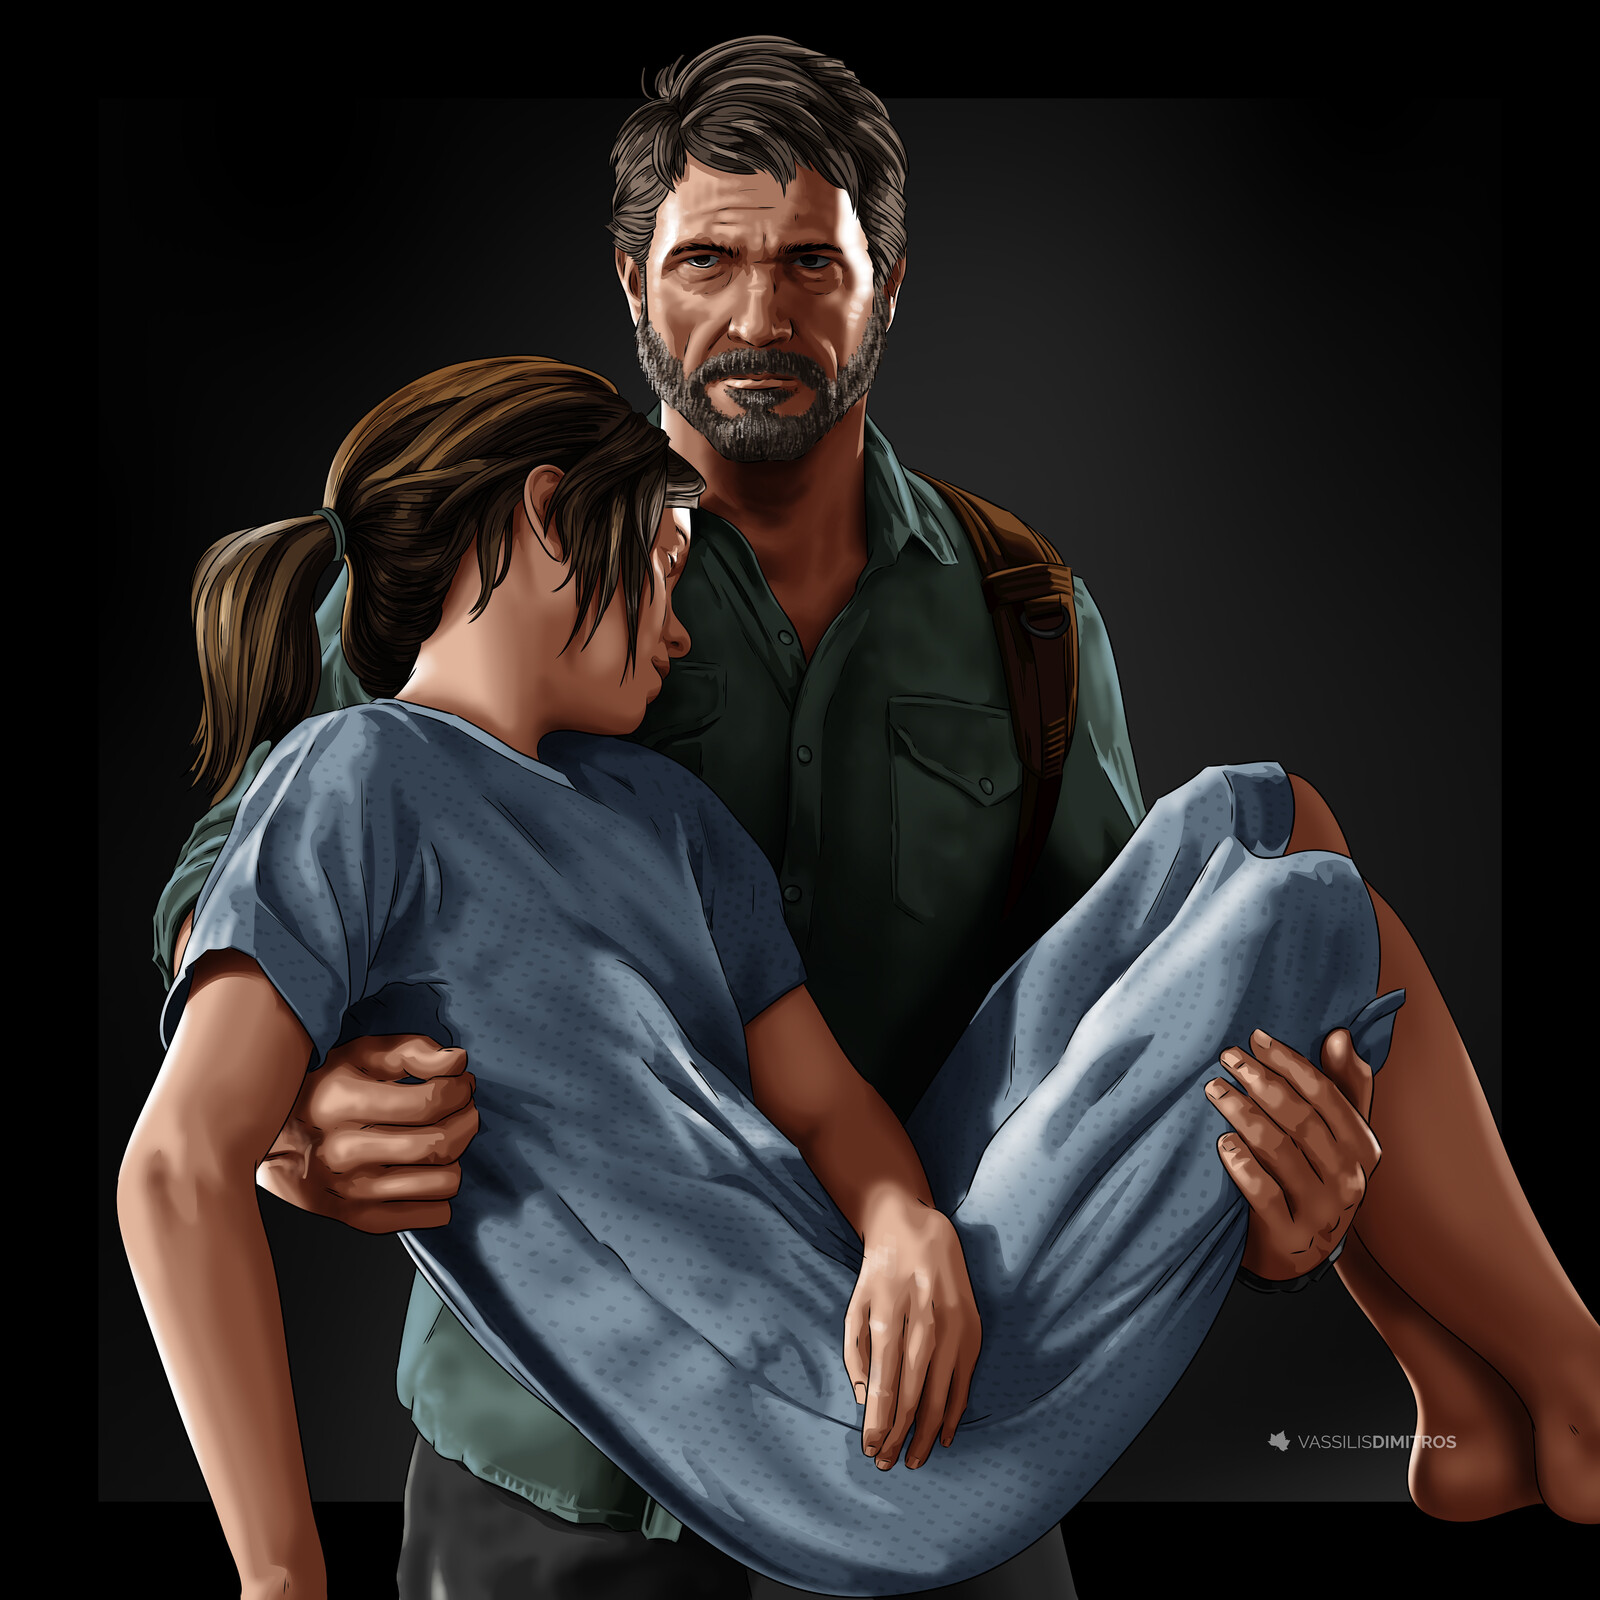 “Swear to me. Swear to me that everything you said about the fireflies is true”

The Last of Us Part 2/5:
The Choice